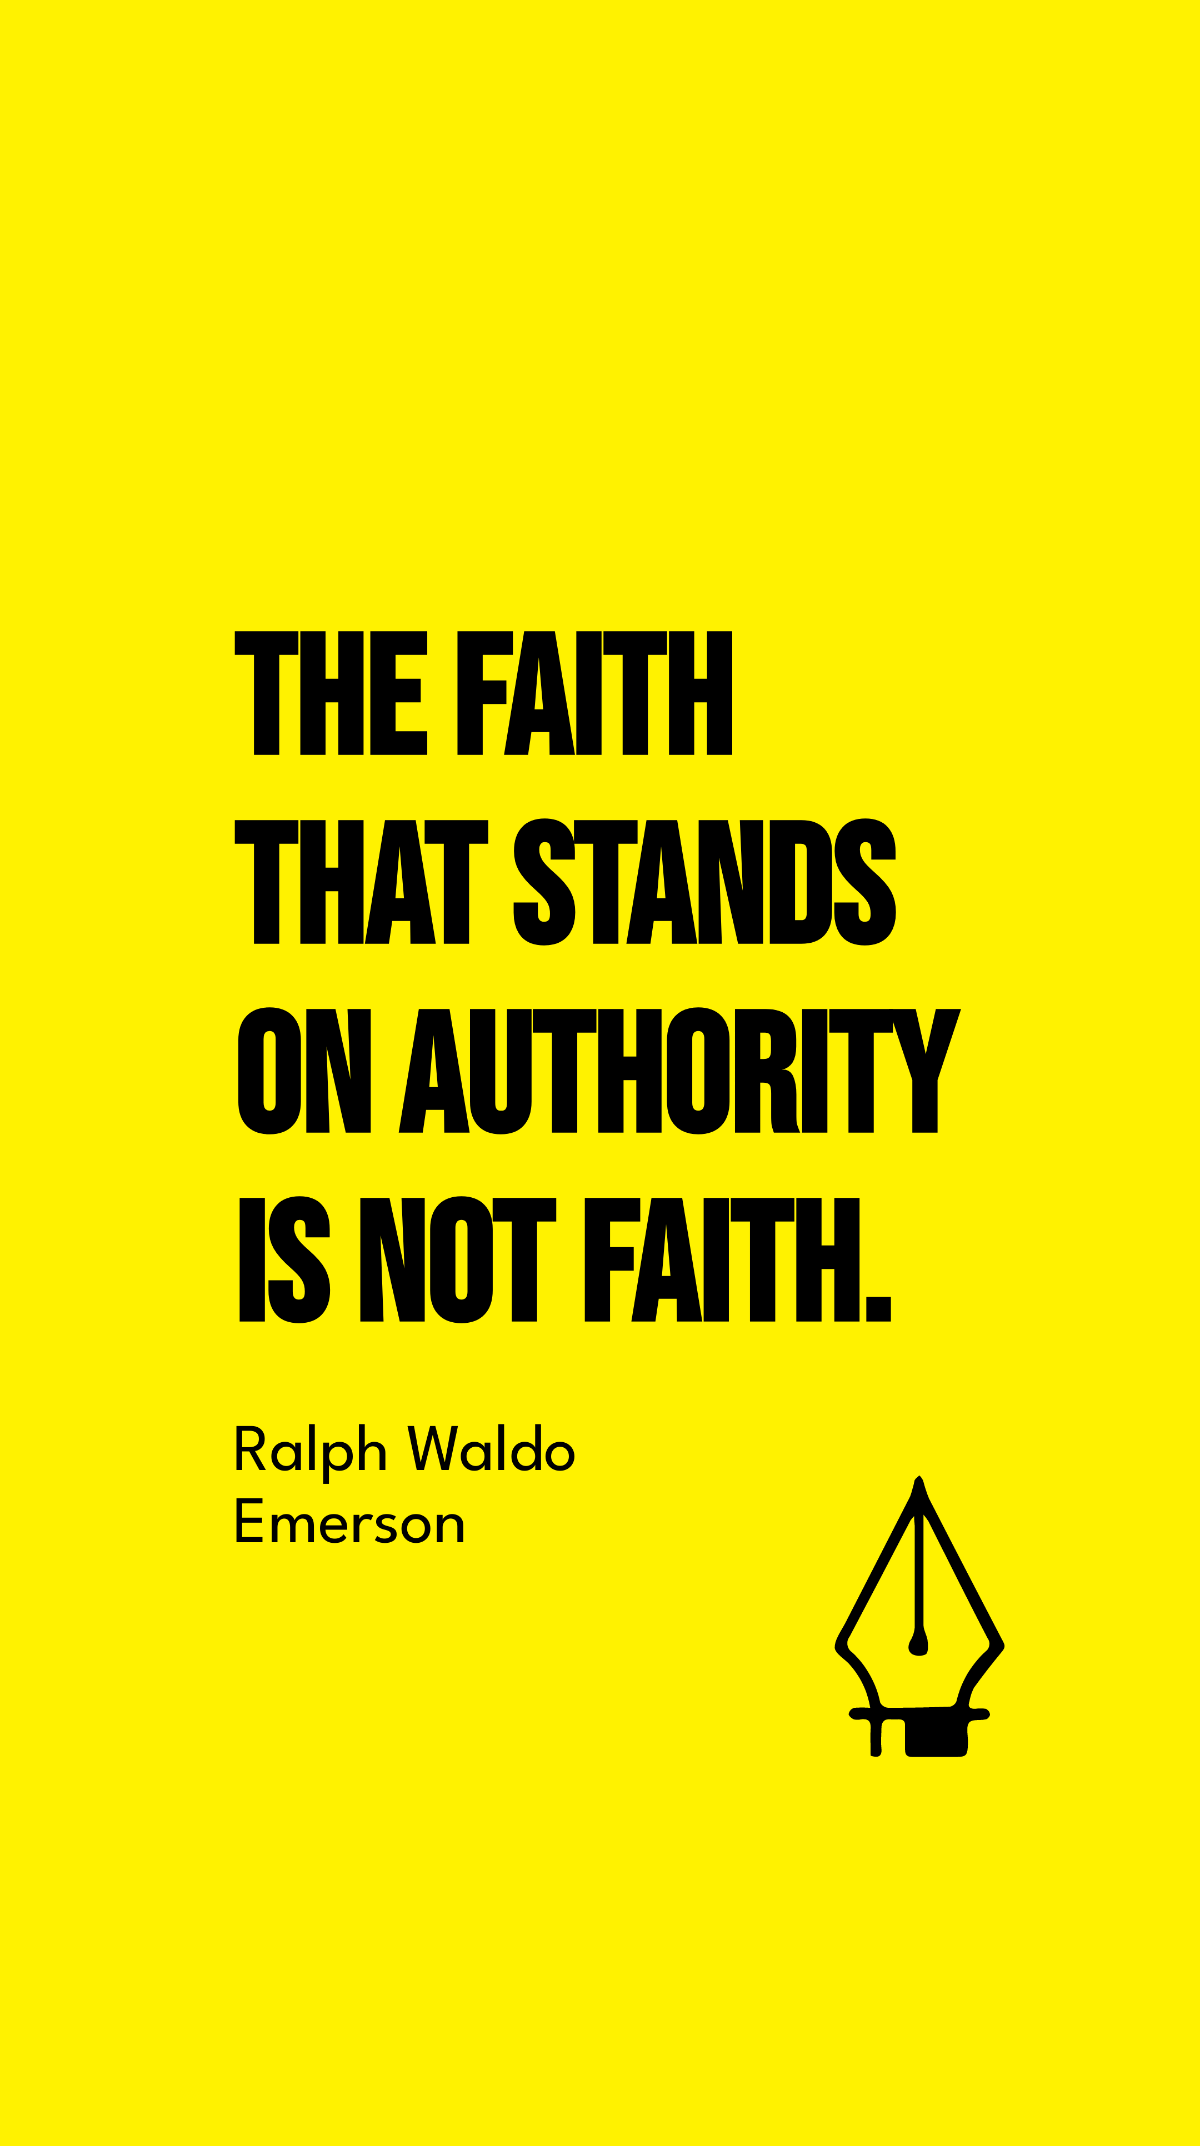 Free Ralph Waldo Emerson - The faith that stands on authority is not faith. Template